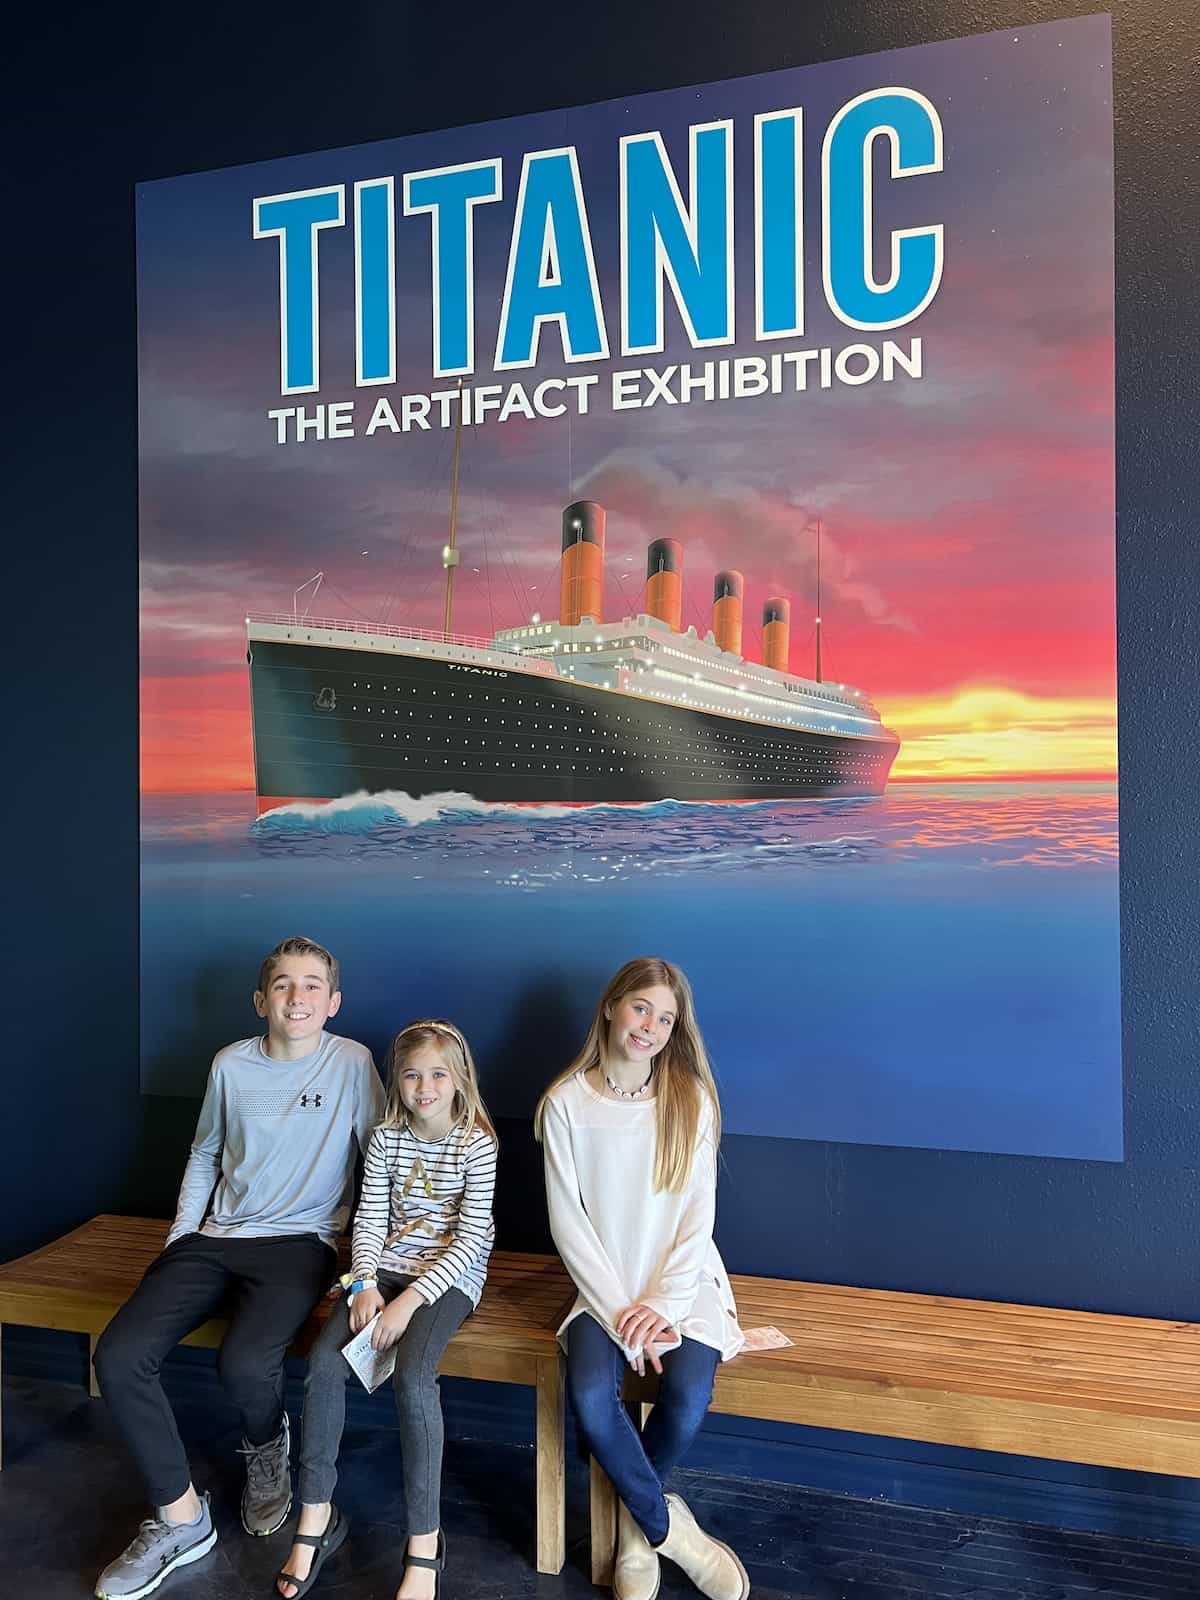 What to Expect at the Titanic Artifact Exhibition Orlando - the Titanic Museum in Orlando FL a great addition to your Florida Vacation